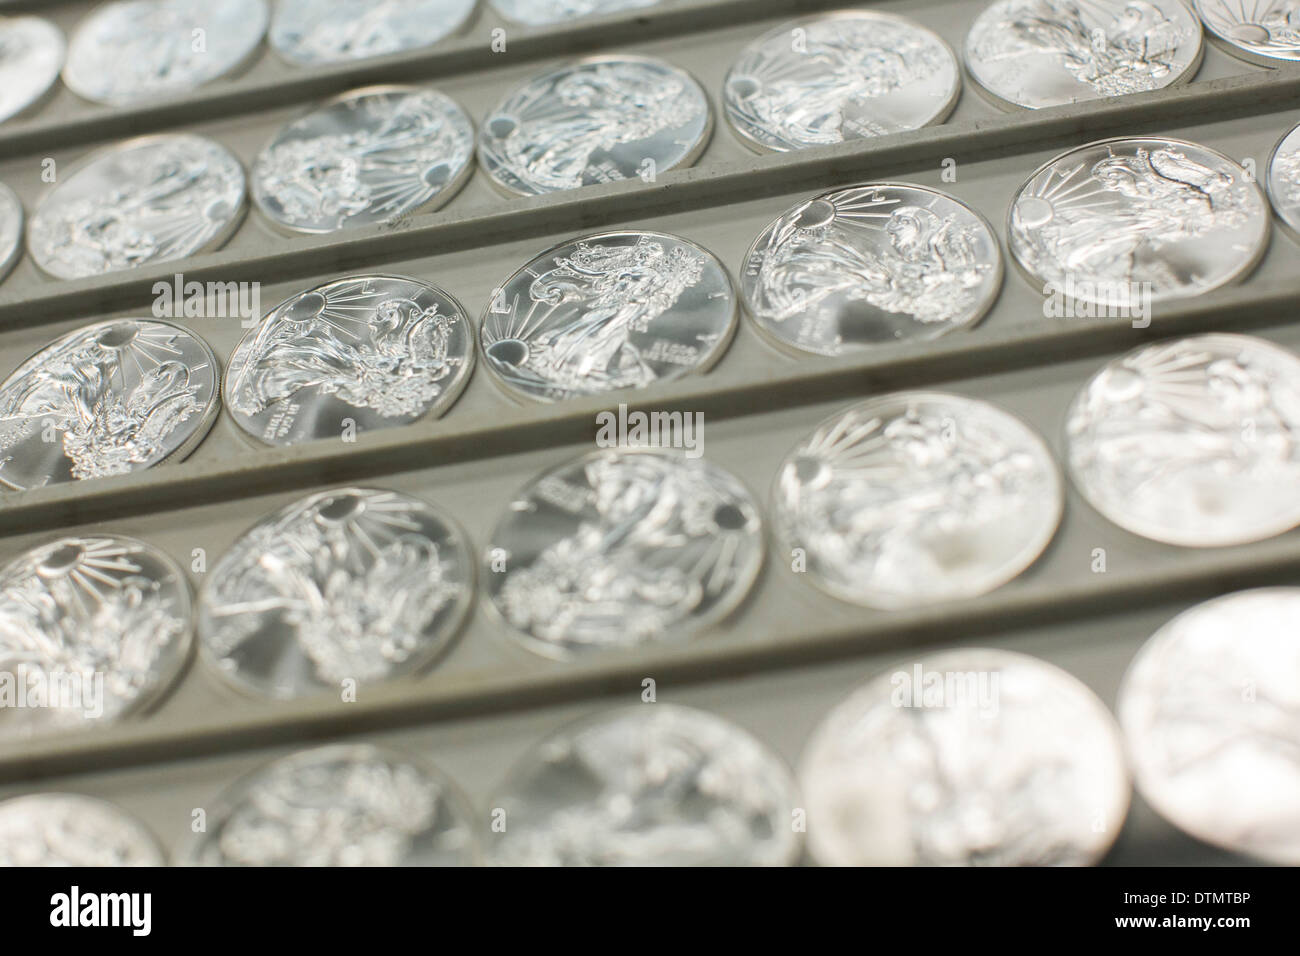 1 ounce Silver Eagle bullion and proof coin production at the West Point Mint.  Stock Photo